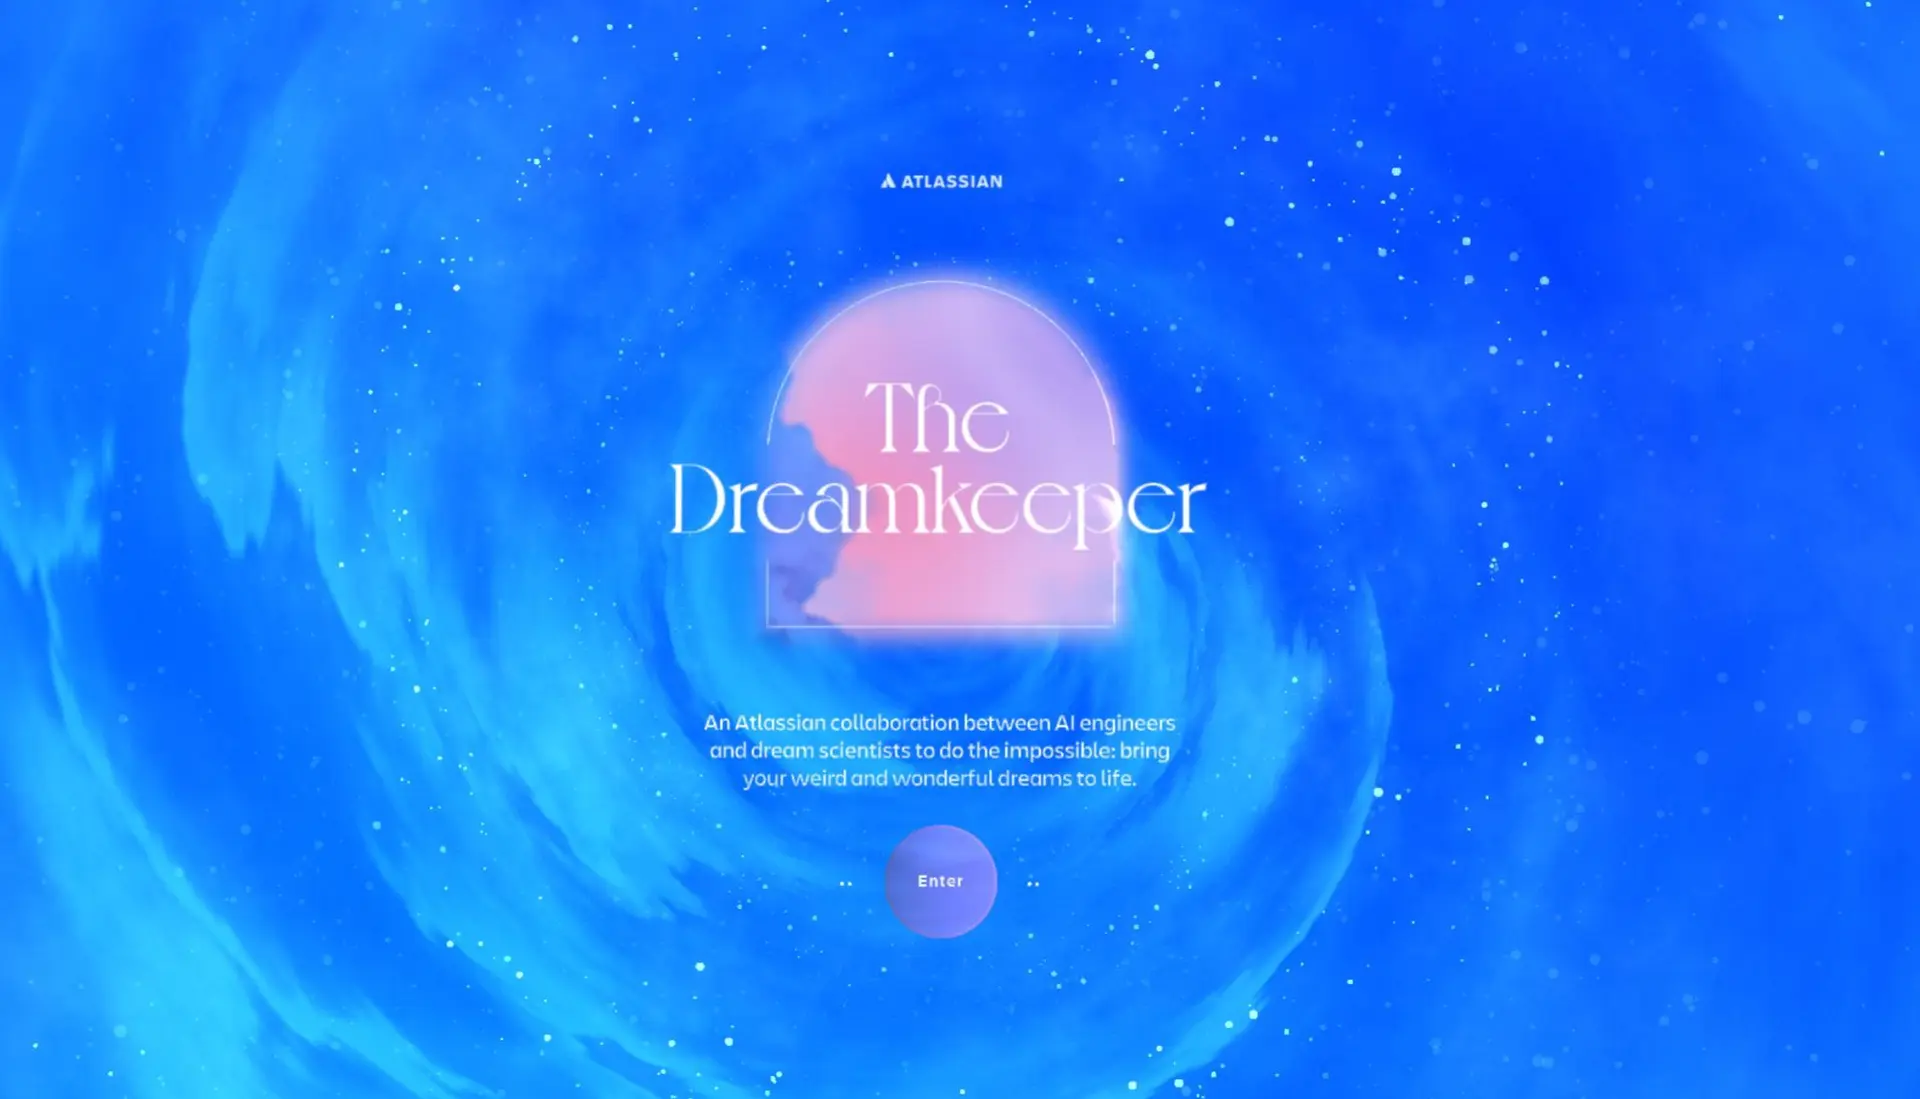 The Dreamkeeperwebsite picture